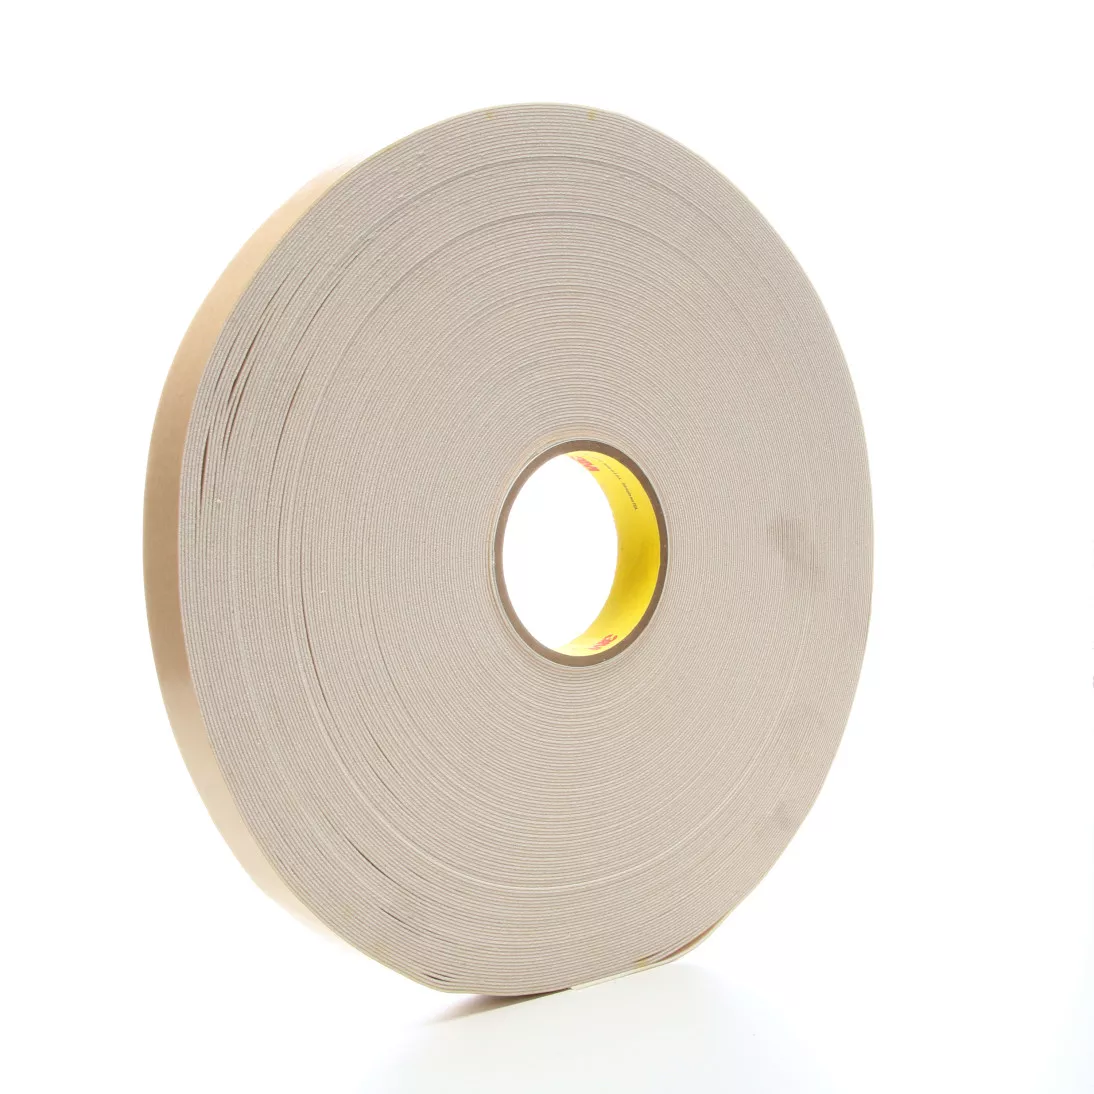 3M™ Double Coated Urethane Foam Tape 4085, Natural, 1 in x 72 yd, 45
mil, 9 rolls per case